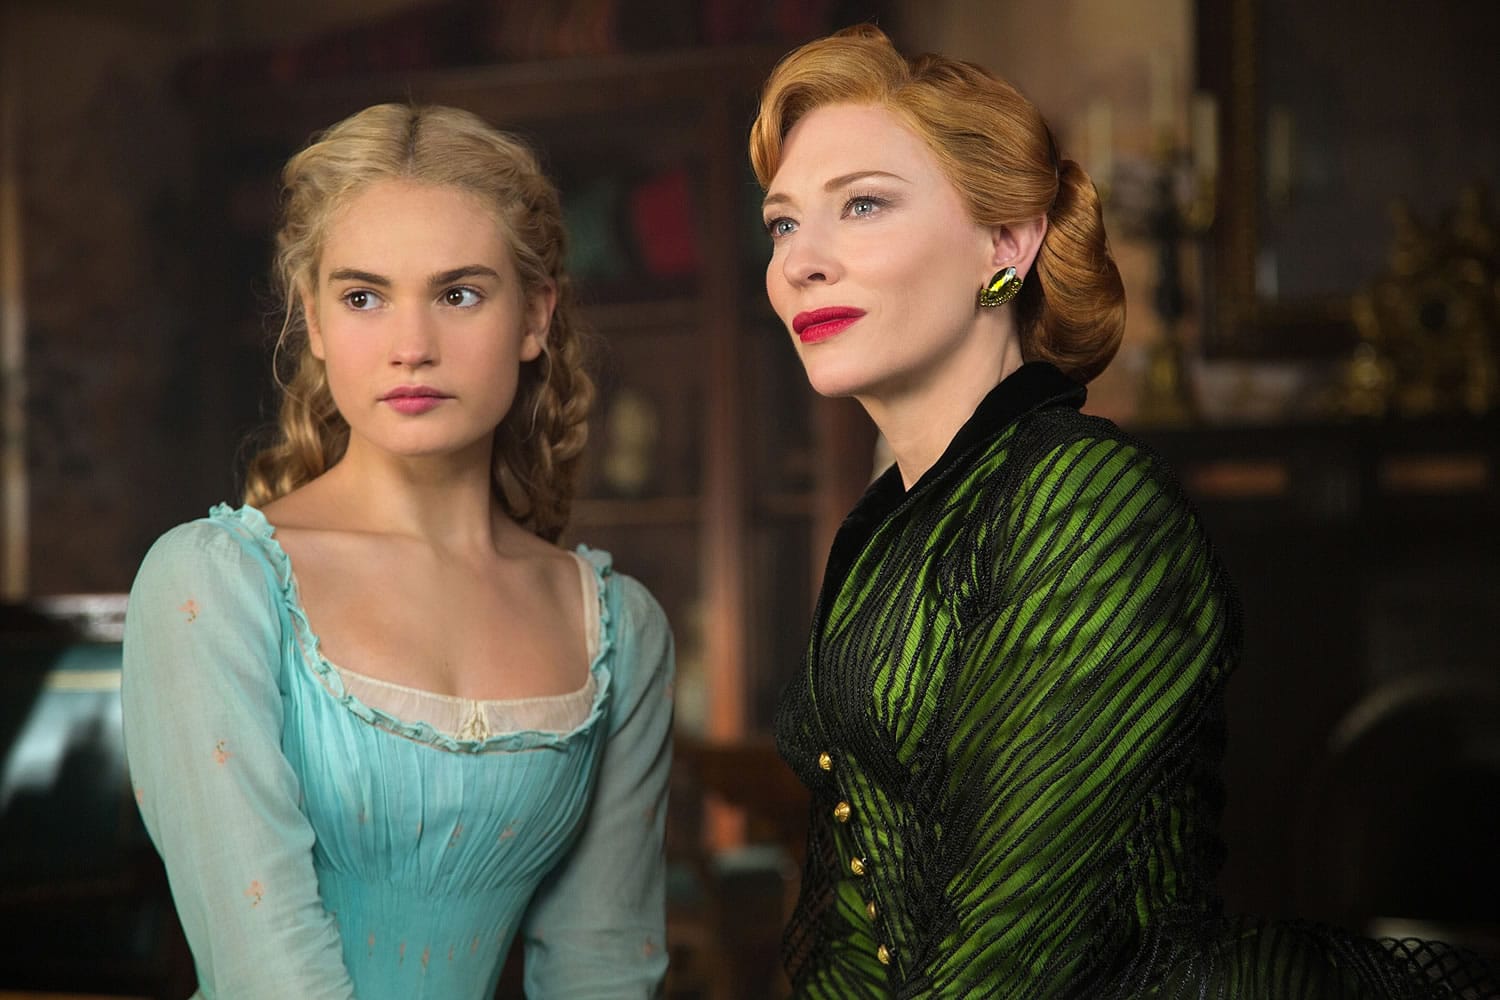 Lily James is Cinderella and Cate Blanchett is the Stepmother in Disney's live-action feature &quot;Cinderella.&quot;